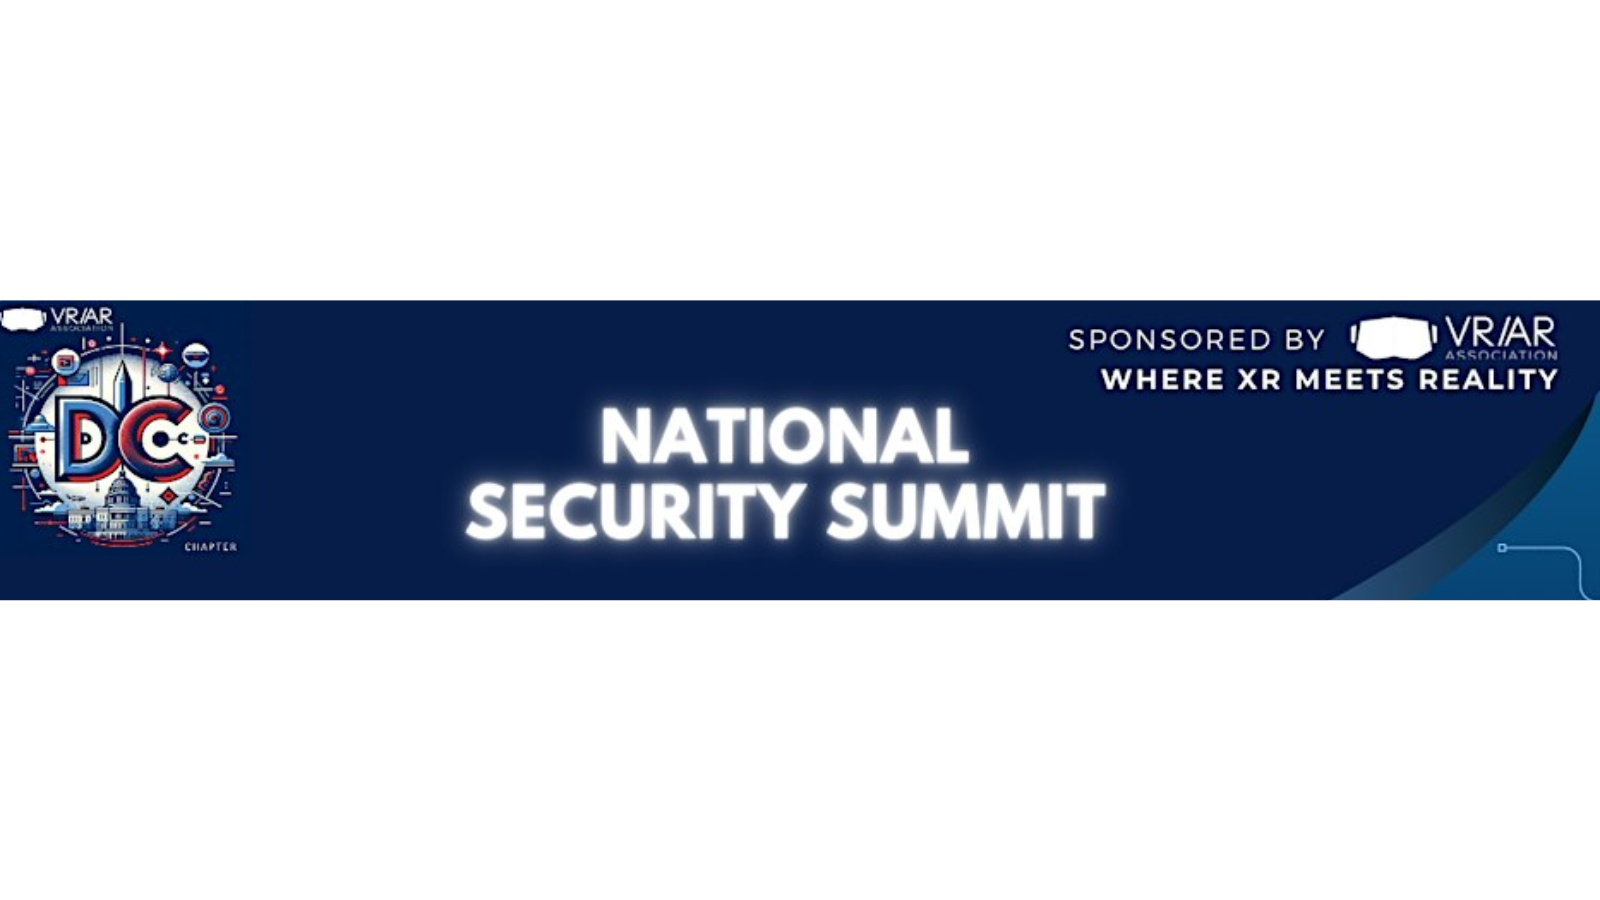 XRA CEO PRESENTED AT THE VRARA DC CHAPTER NATIONAL SECURITY SUMMIT